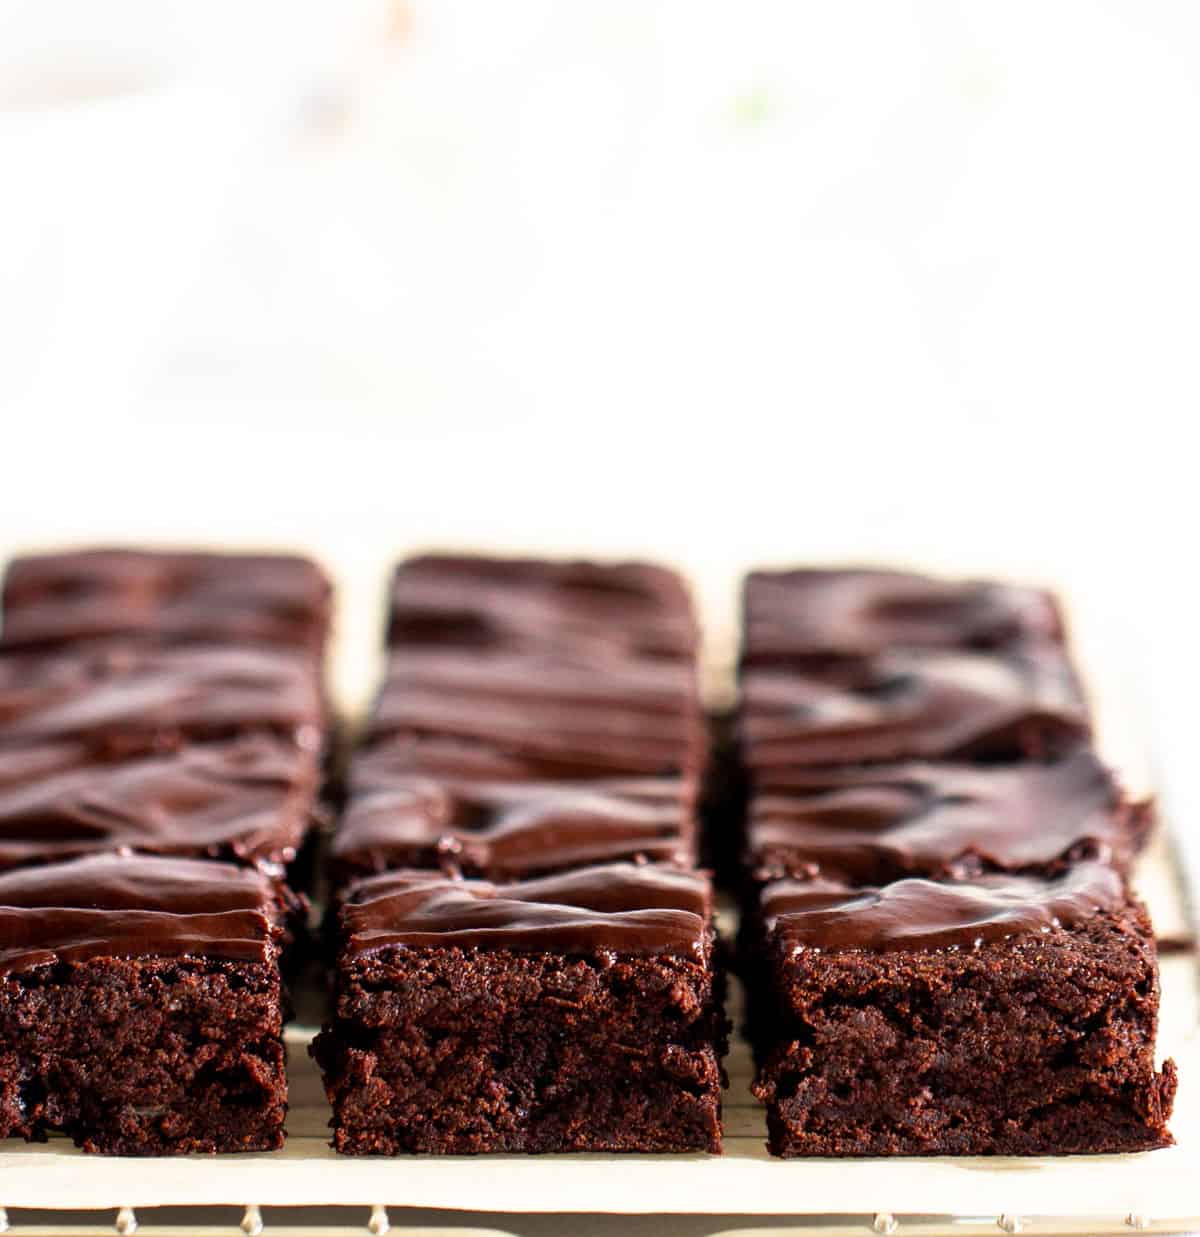 Brownie squares with ganache on top on parchment paper and wire rack.